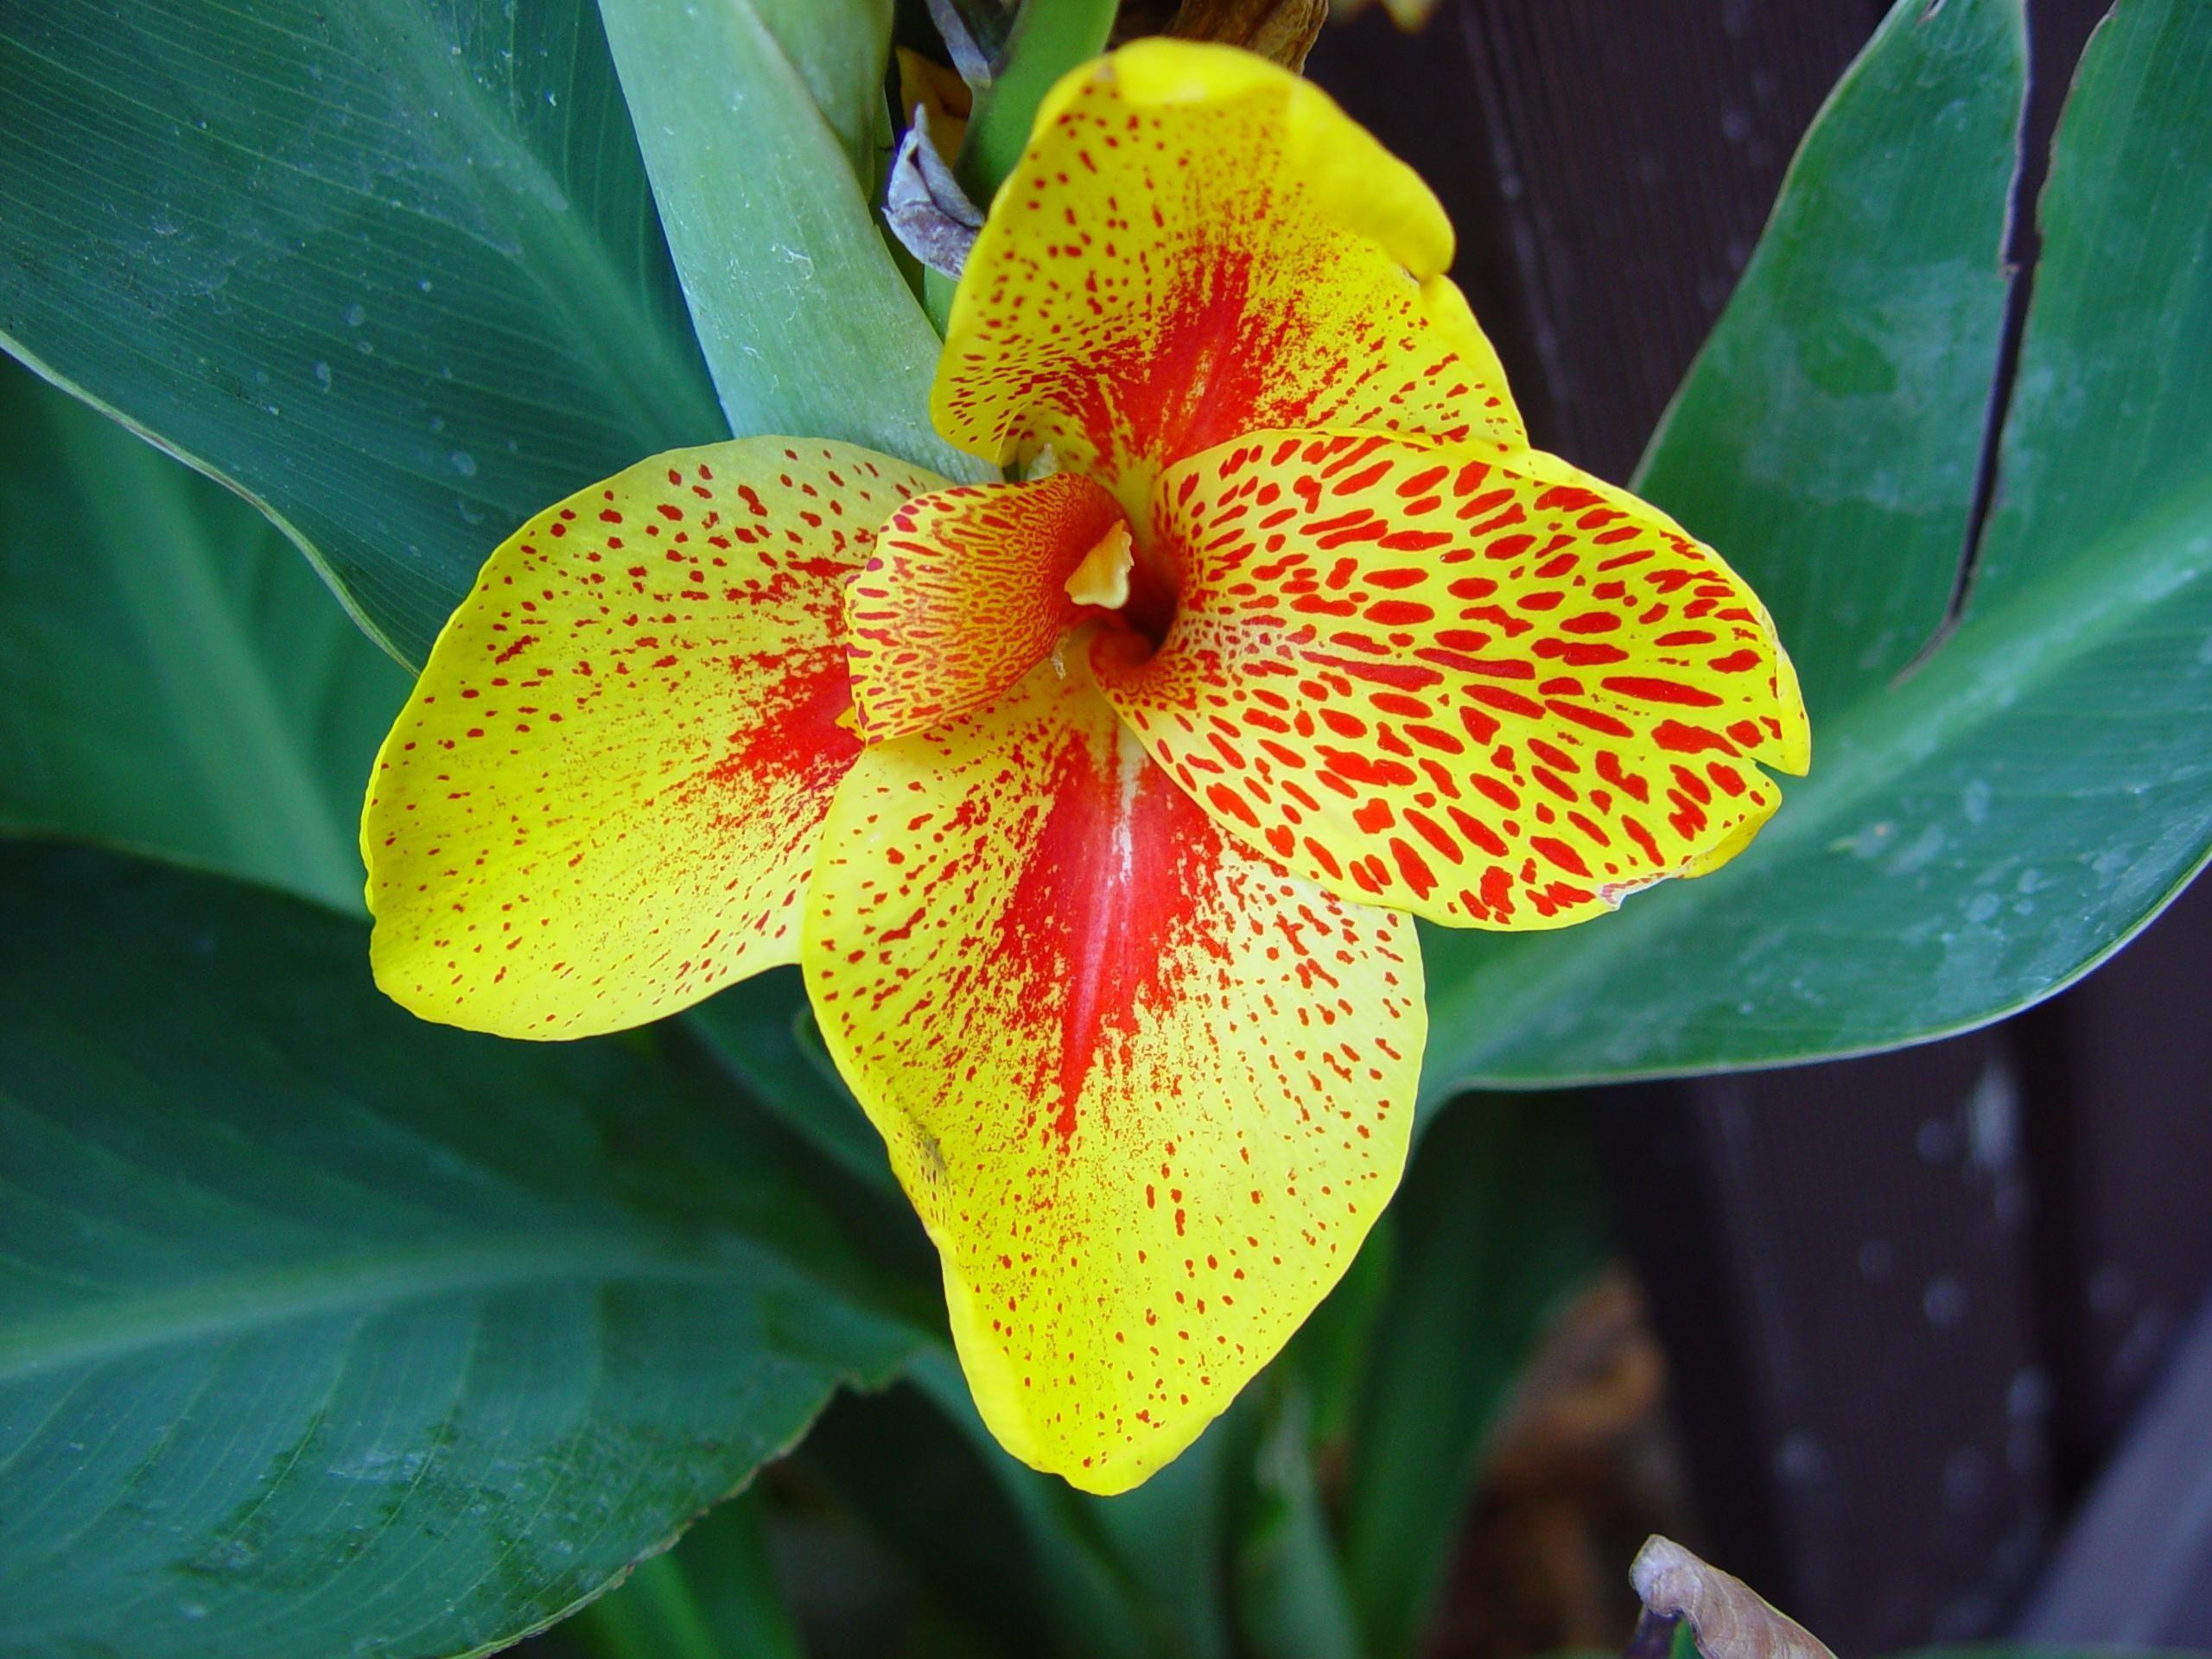 Red Green and Yellow Flower Logo - File:Gold and red flower dark green leaves.jpg - Wikimedia Commons